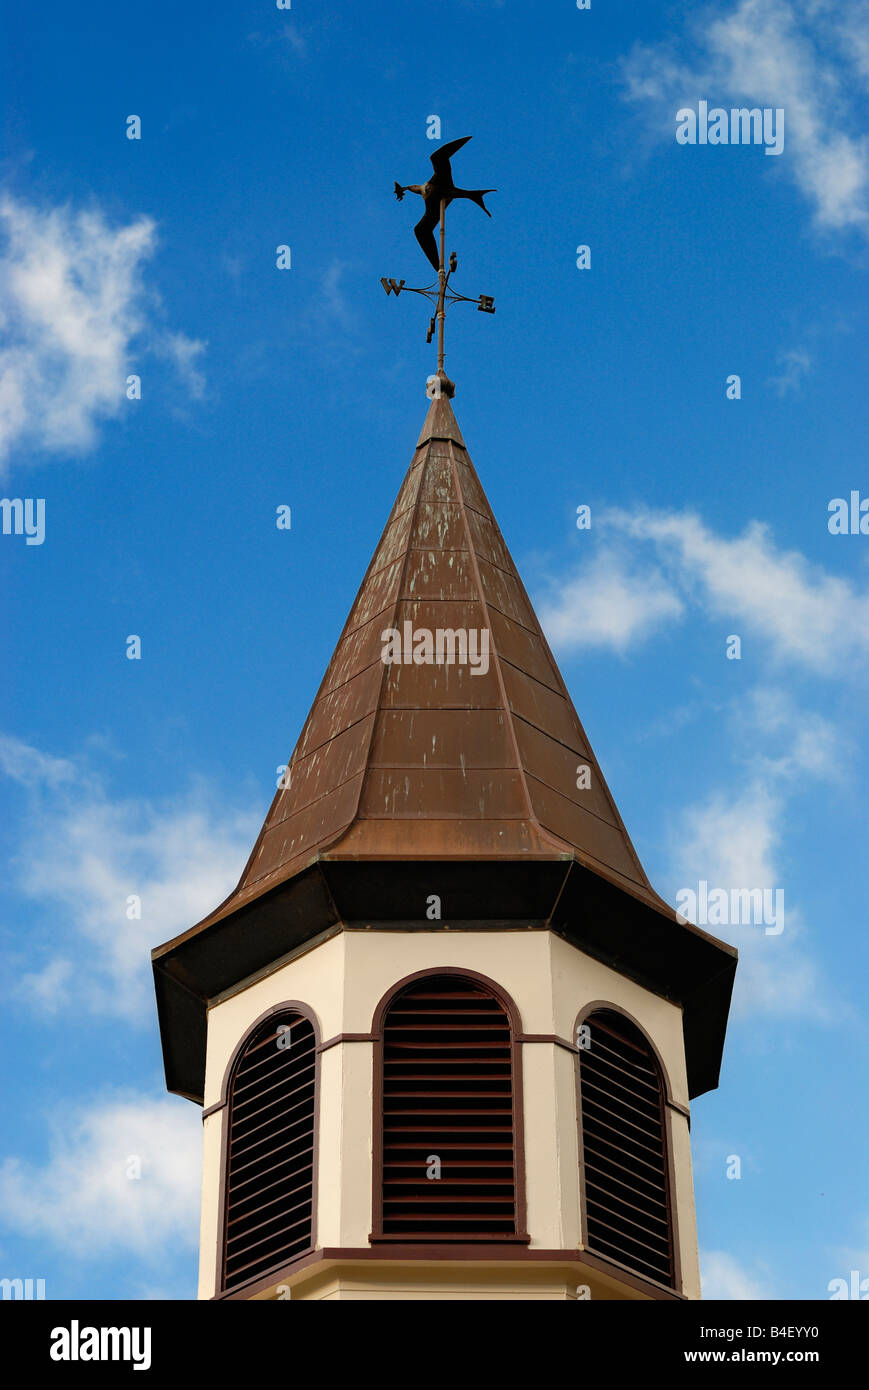 Mormon church spire depicting the Miracle of the Seagulls event that occured in 1848 Stock Photo